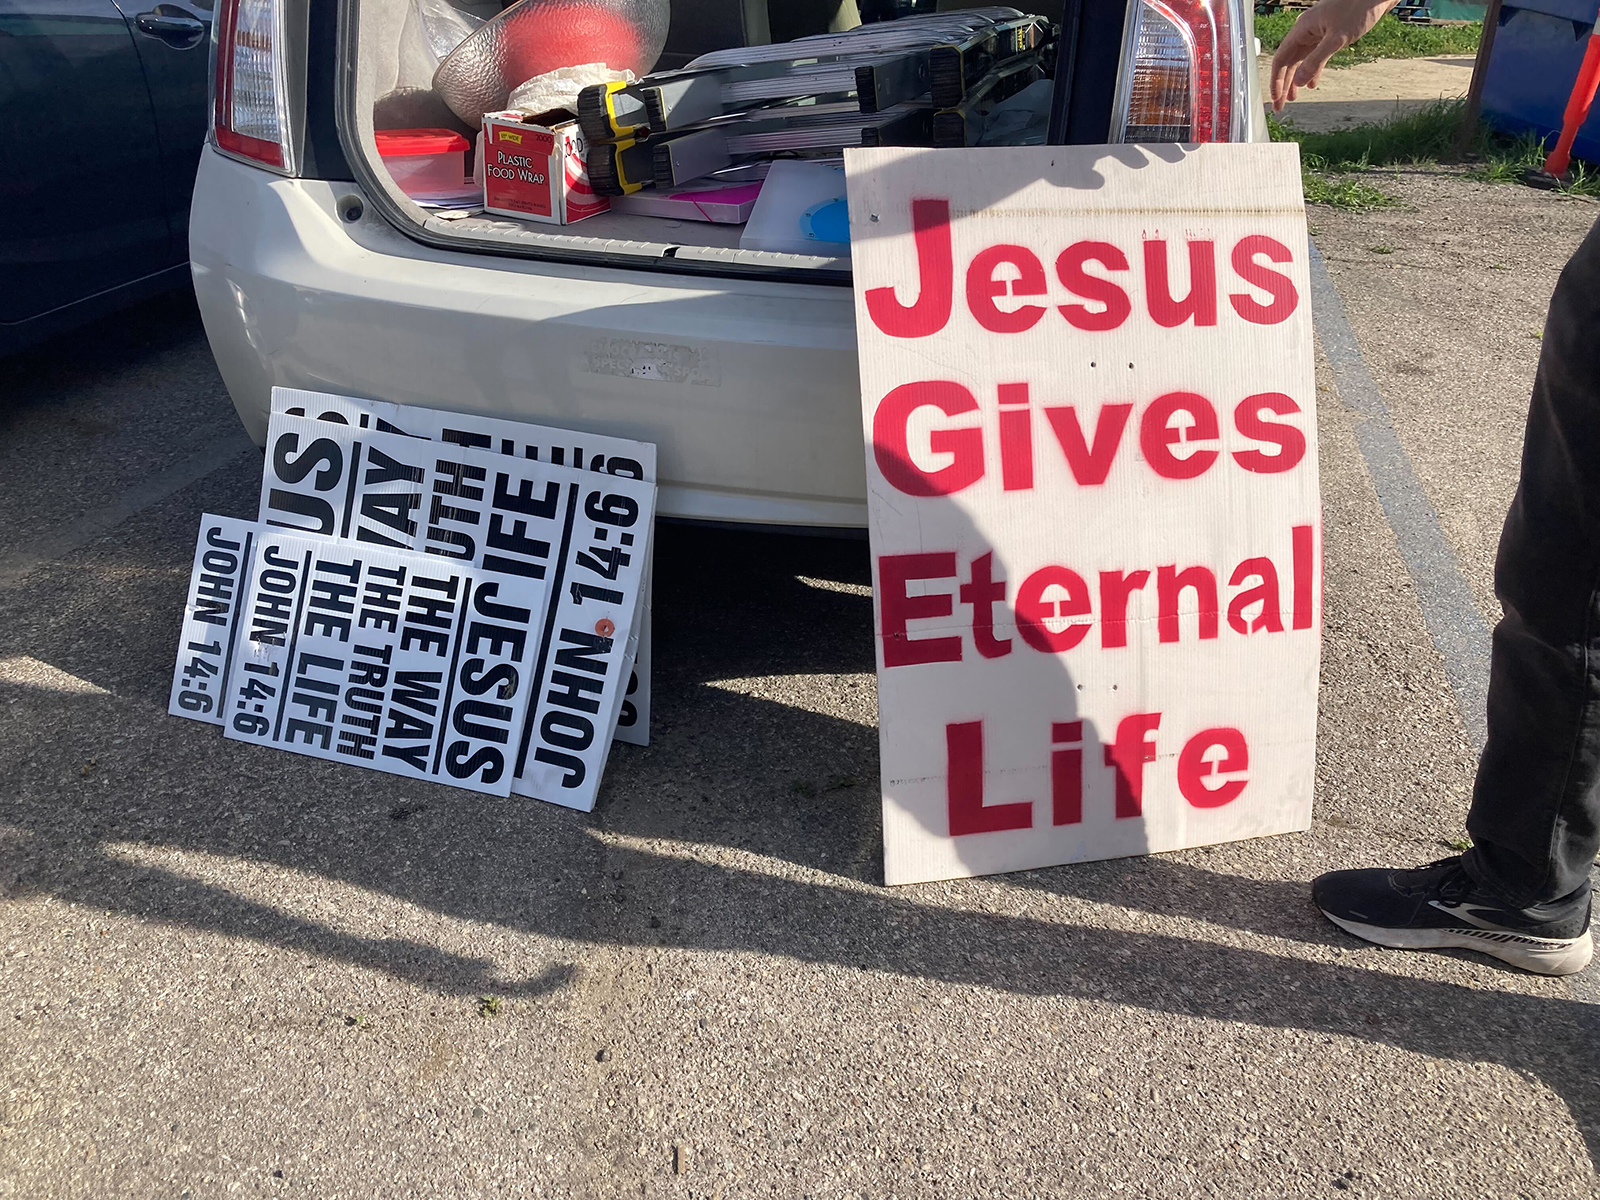 Illegally placed religious materials on public streets are removed by members of Atheists United, Saturday, Feb. 19, 2022, in Los Angeles. RNS photo by Alejandra Molina